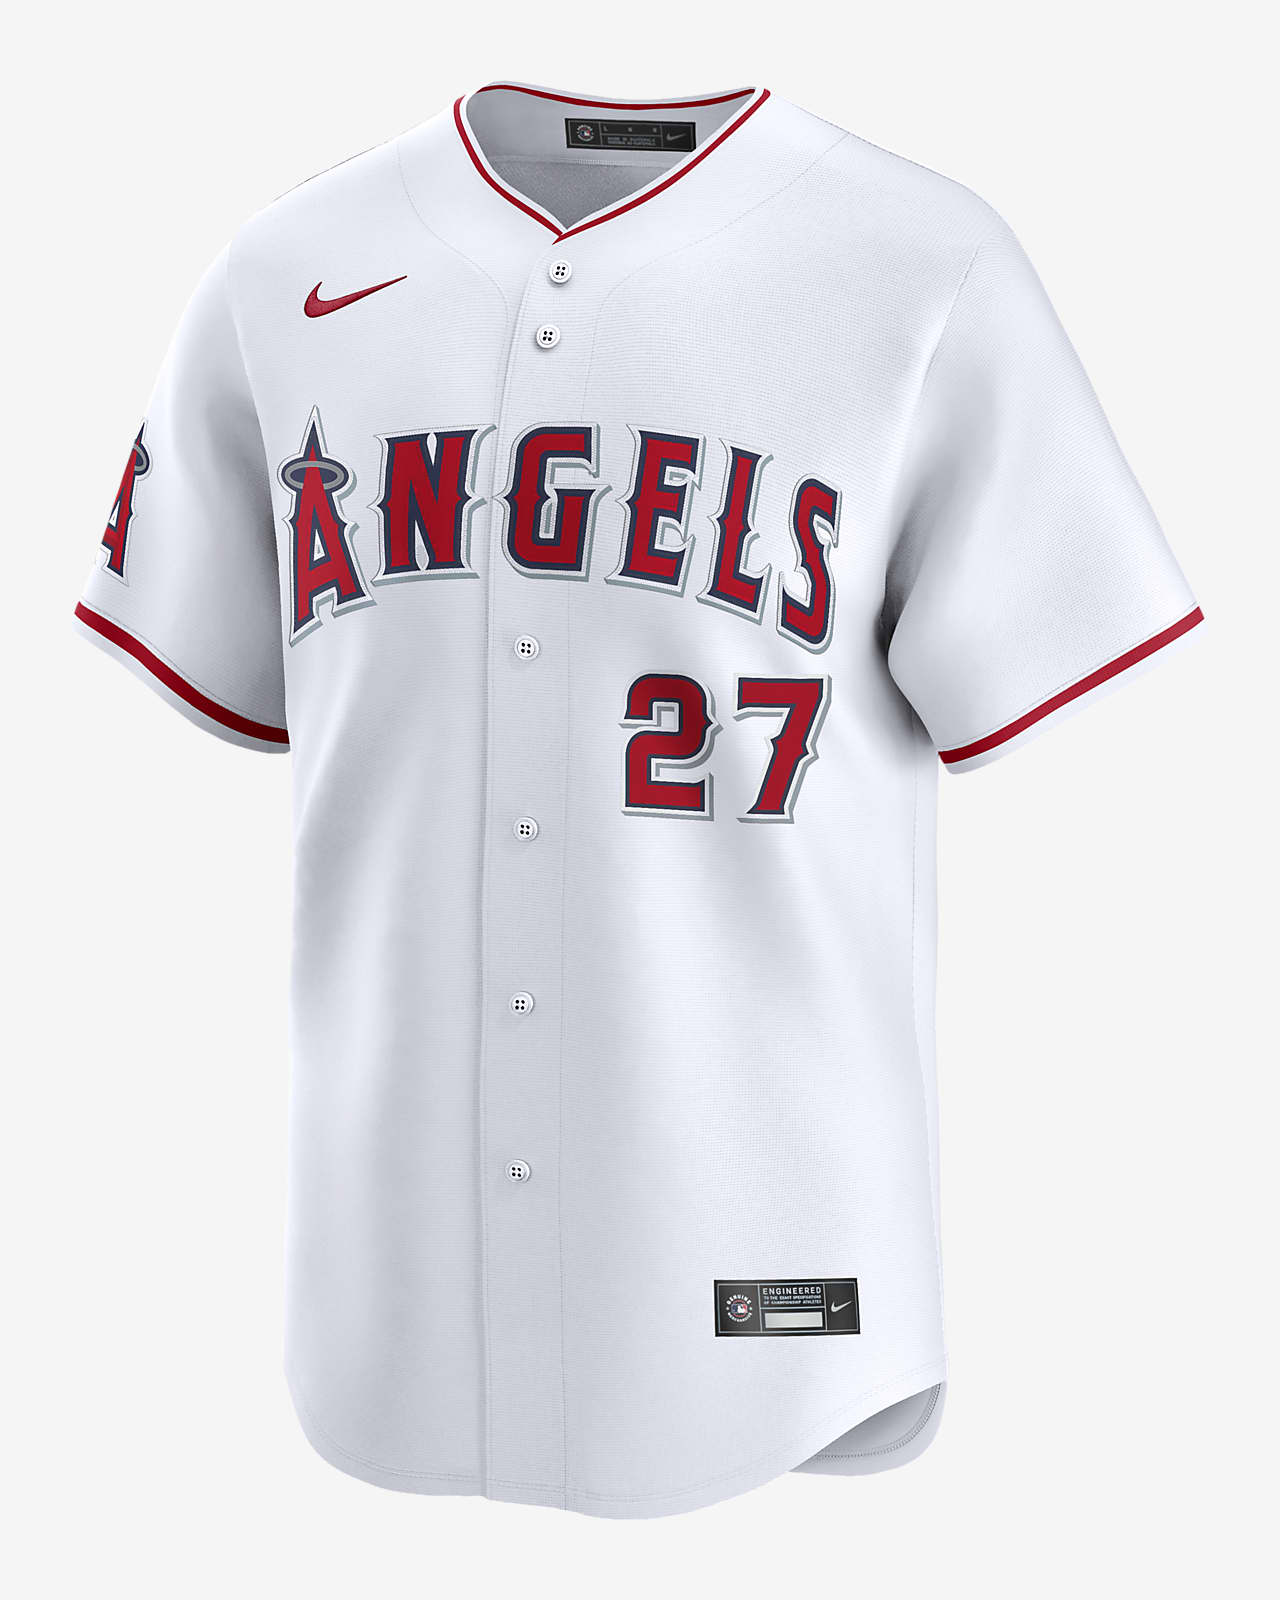 Mike Trout Los Angeles Angels Men's Nike Dri-FIT ADV MLB Limited Jersey